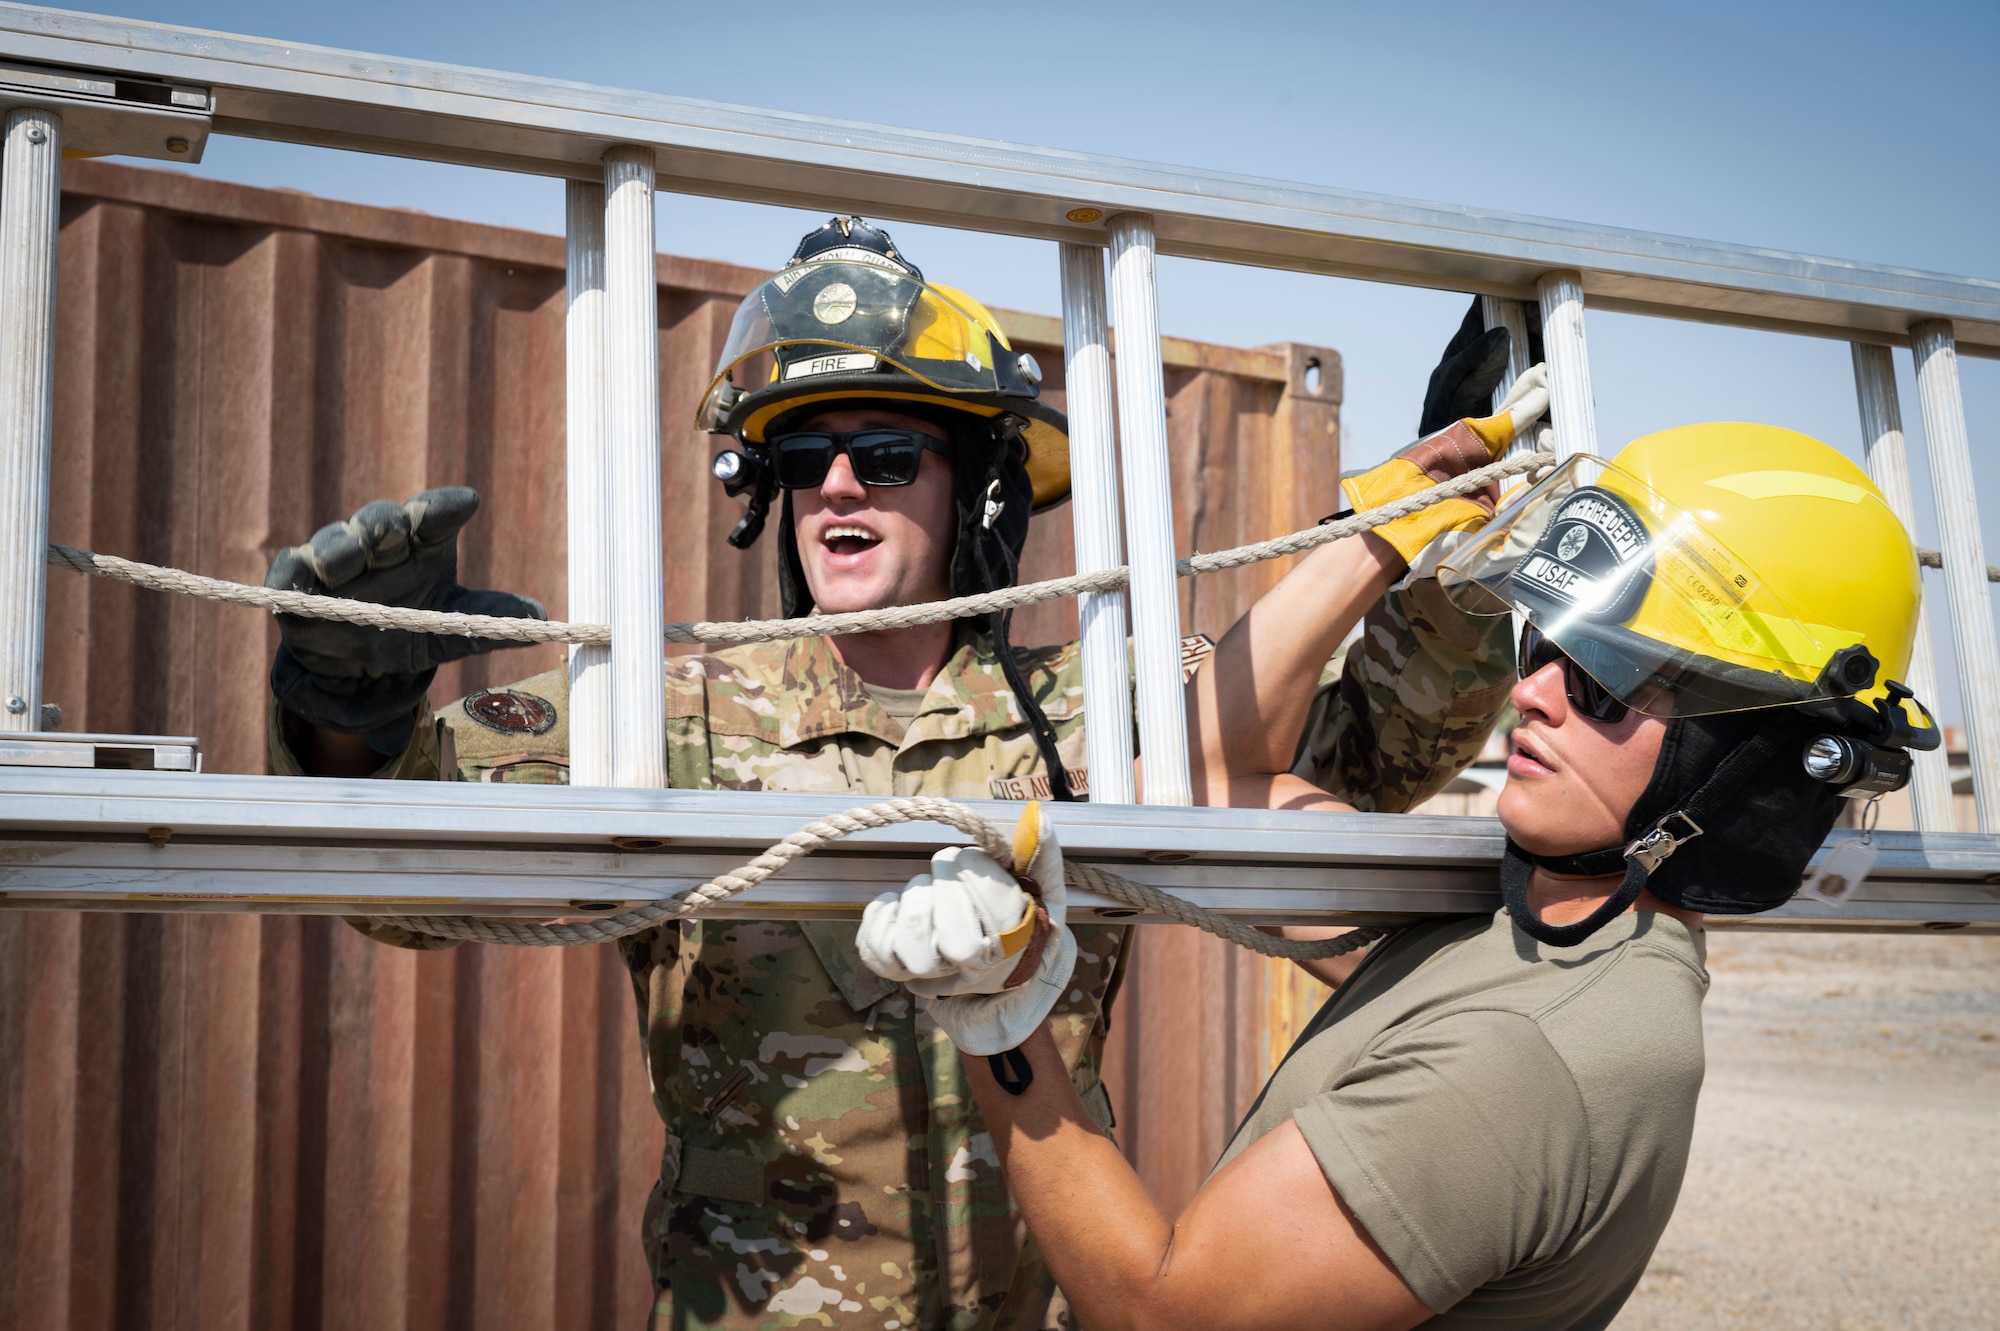 U.S. Air Force Staff Sgt. Nicholas Tafanelli, 386th Expeditionary Civil Engineer Squadron fire protection, conducts ladder training with Airman Abraham Guzman, 386th ECES fire protection, at Ali Al Salem Air Base, Kuwait, August 7, 2022. Thankful for the opportunities and mentorship he has received throughout his career, Tafanelli makes it his personal mission to pass on the knowledge to others. (U.S. Air Force photo by Staff Sgt. Dalton Williams)